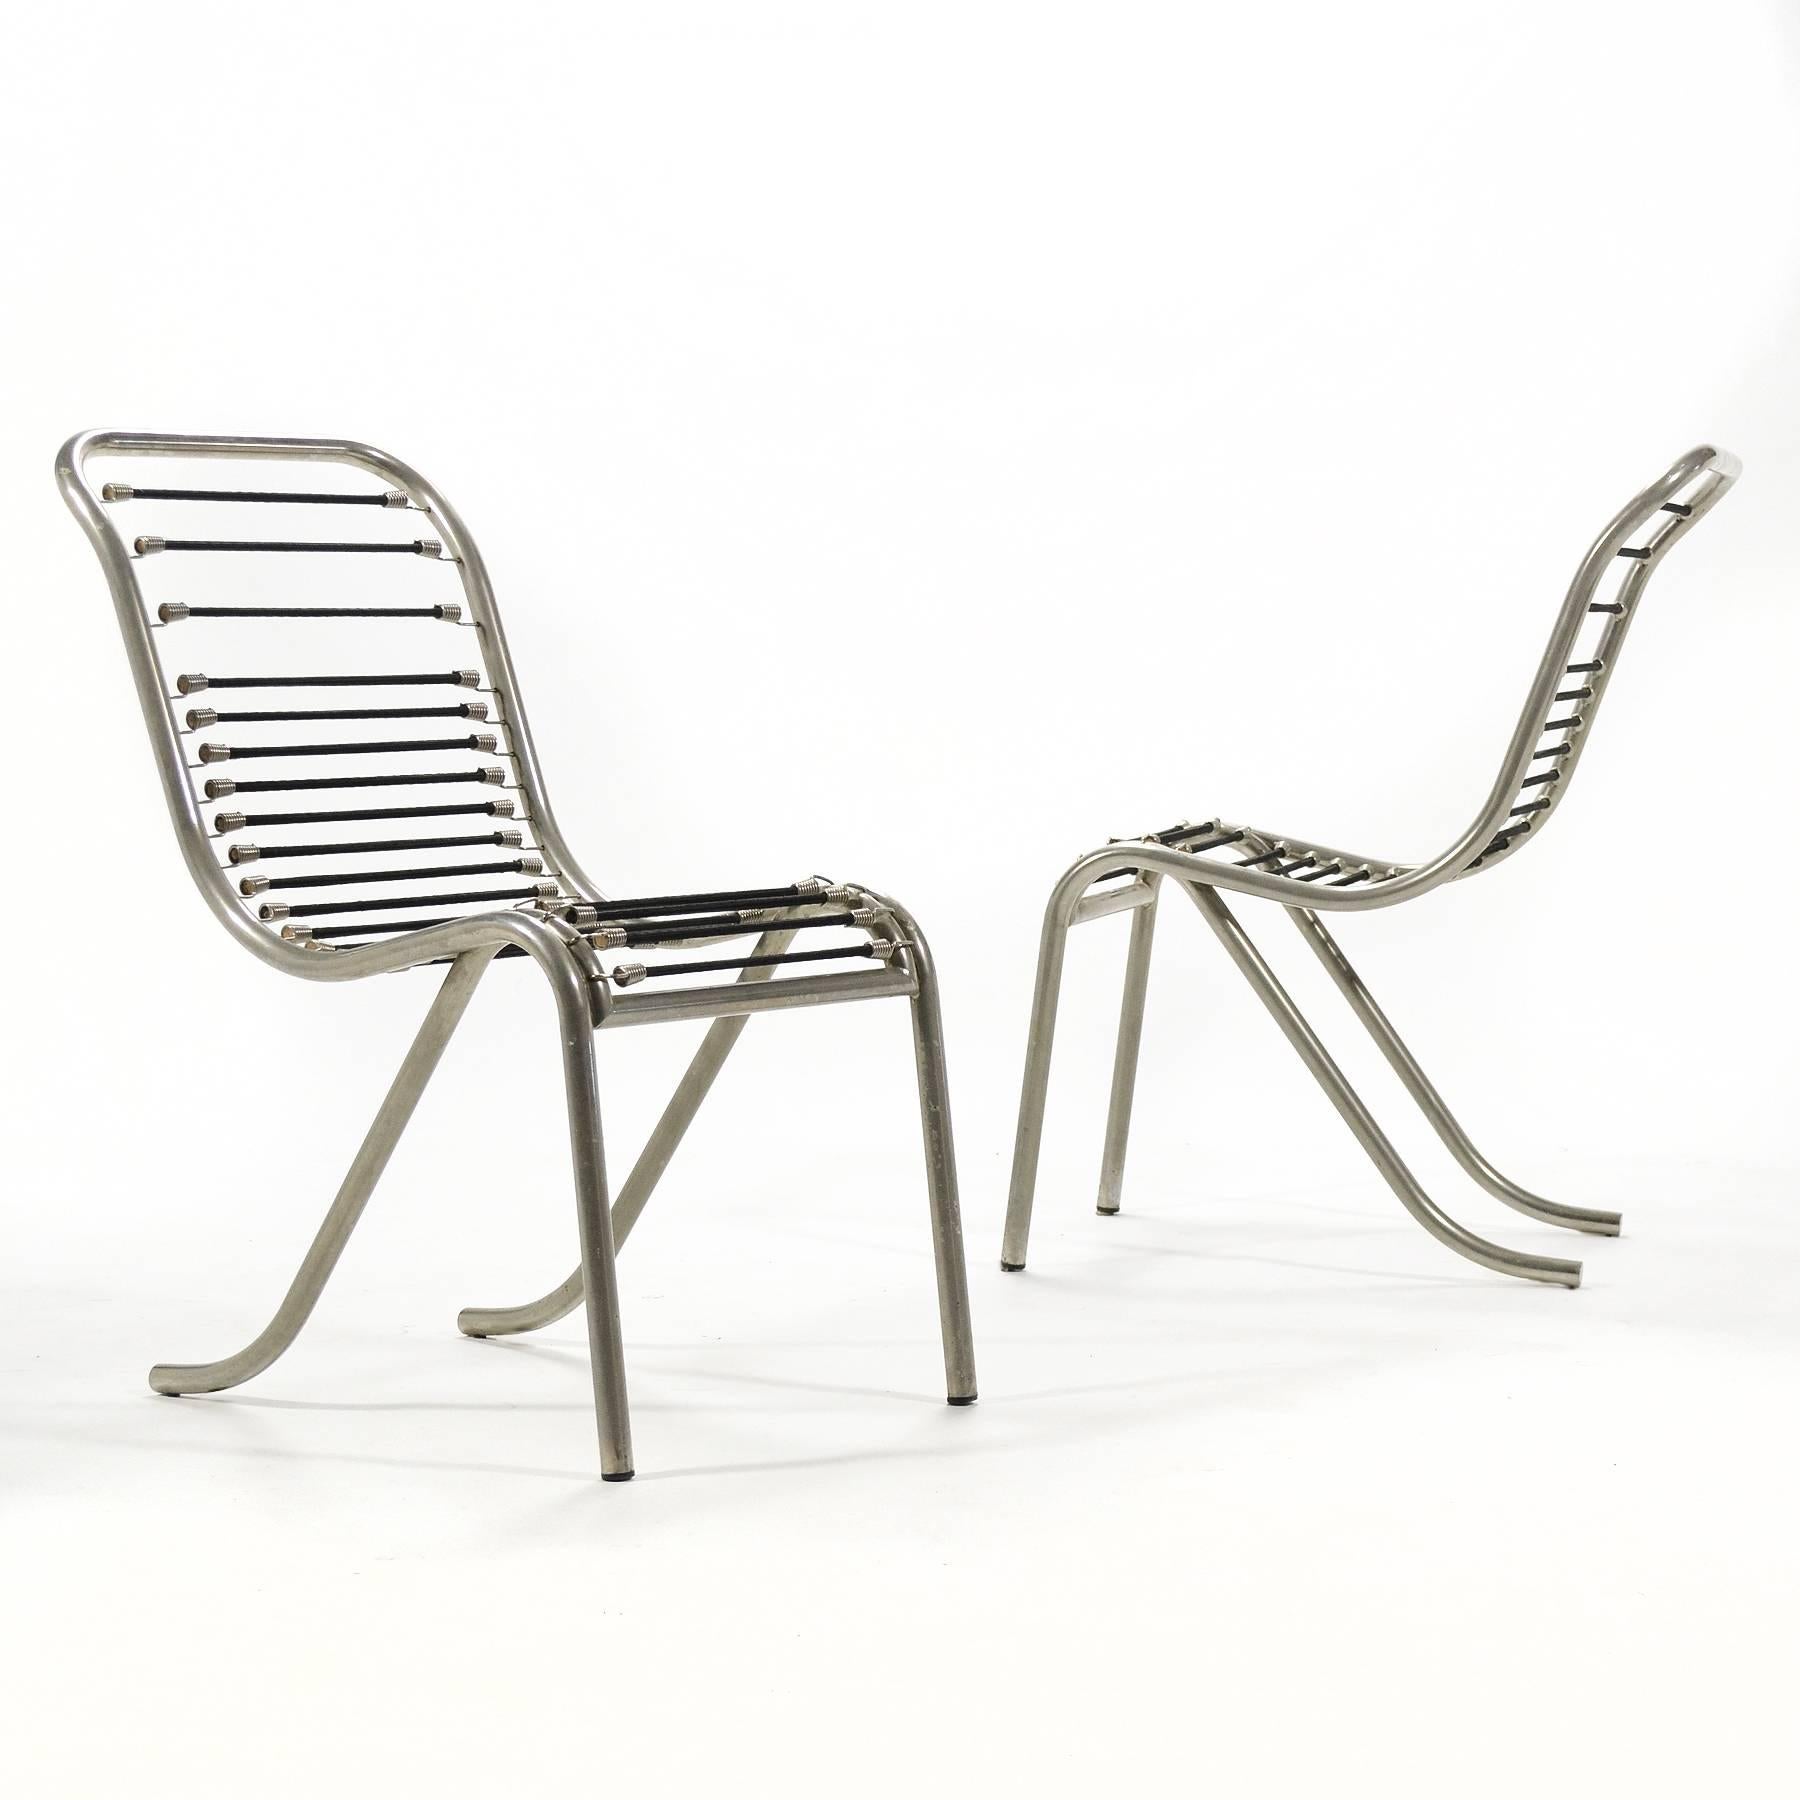 This exceptional and rare pair of René Herbst Sandows chairs are a more sculptural variation than the typical straight-lined side chair. With a more relaxed pitch to the seat, they are better suited for lounging or conversing.